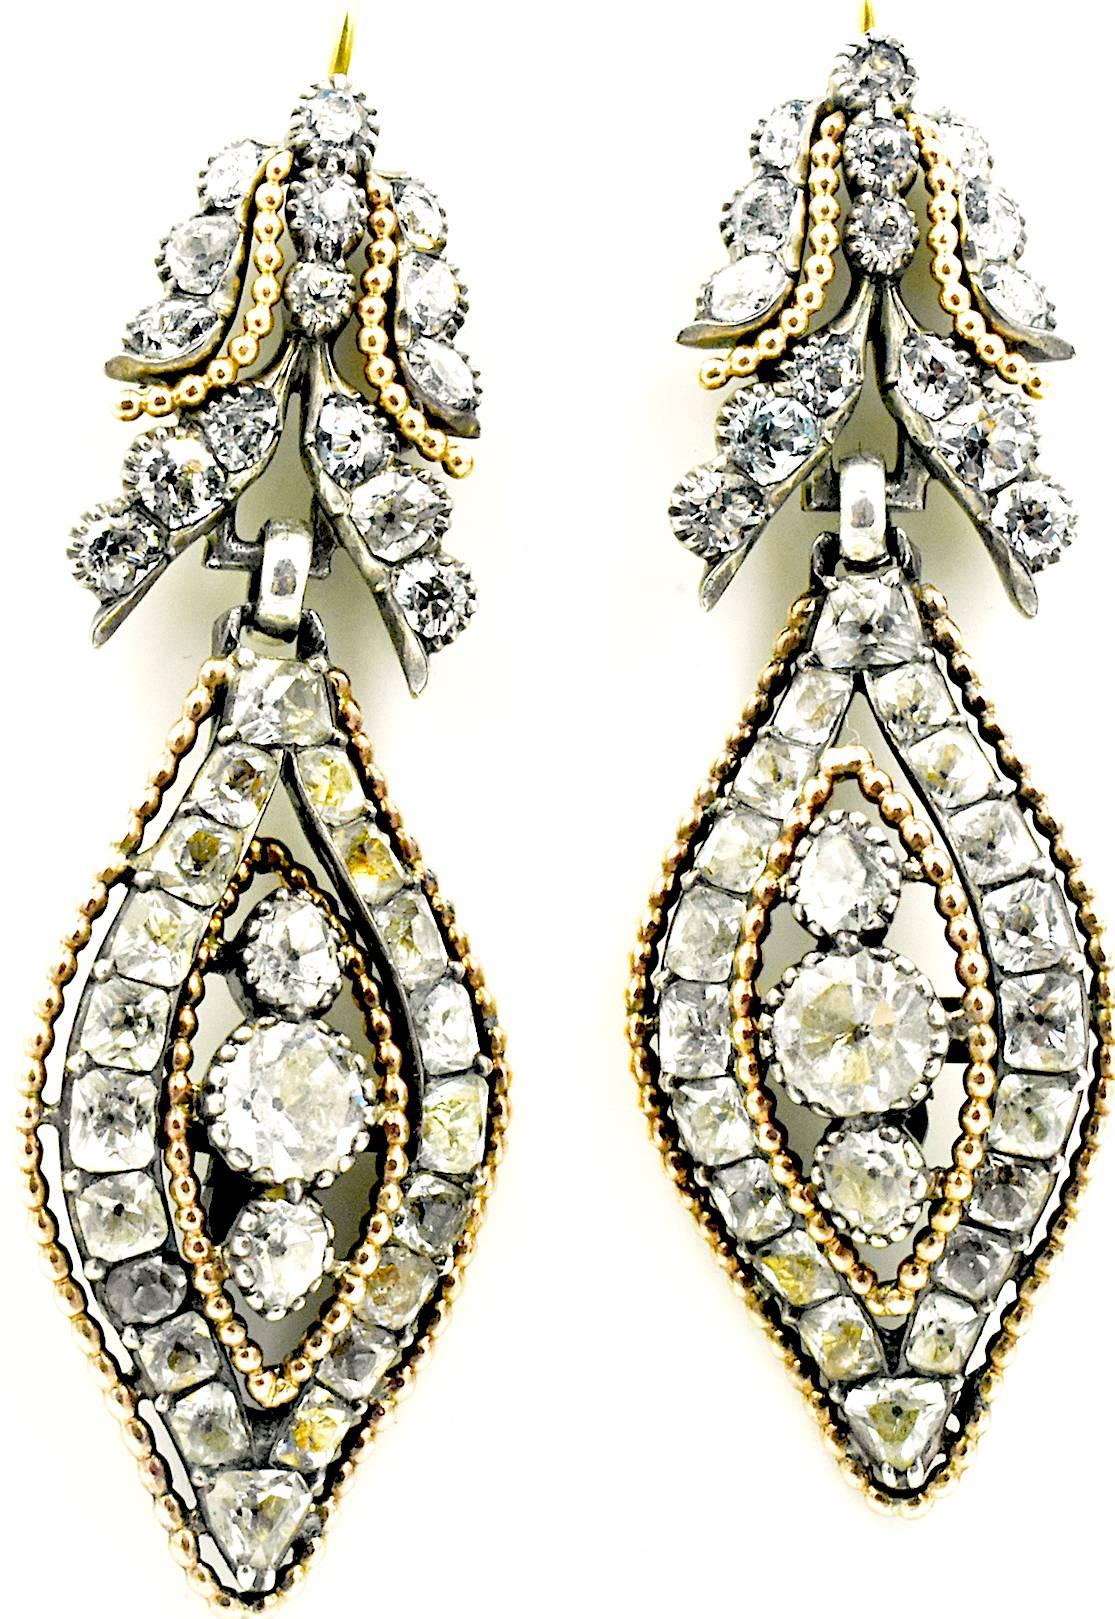 Antique Portuguese rock crystal drop earrings set in silver and 18K gold. The crystals are edged with gold beading that emphasizes the shape and design of the earrings. They date from 1800 and measure 2 1/8